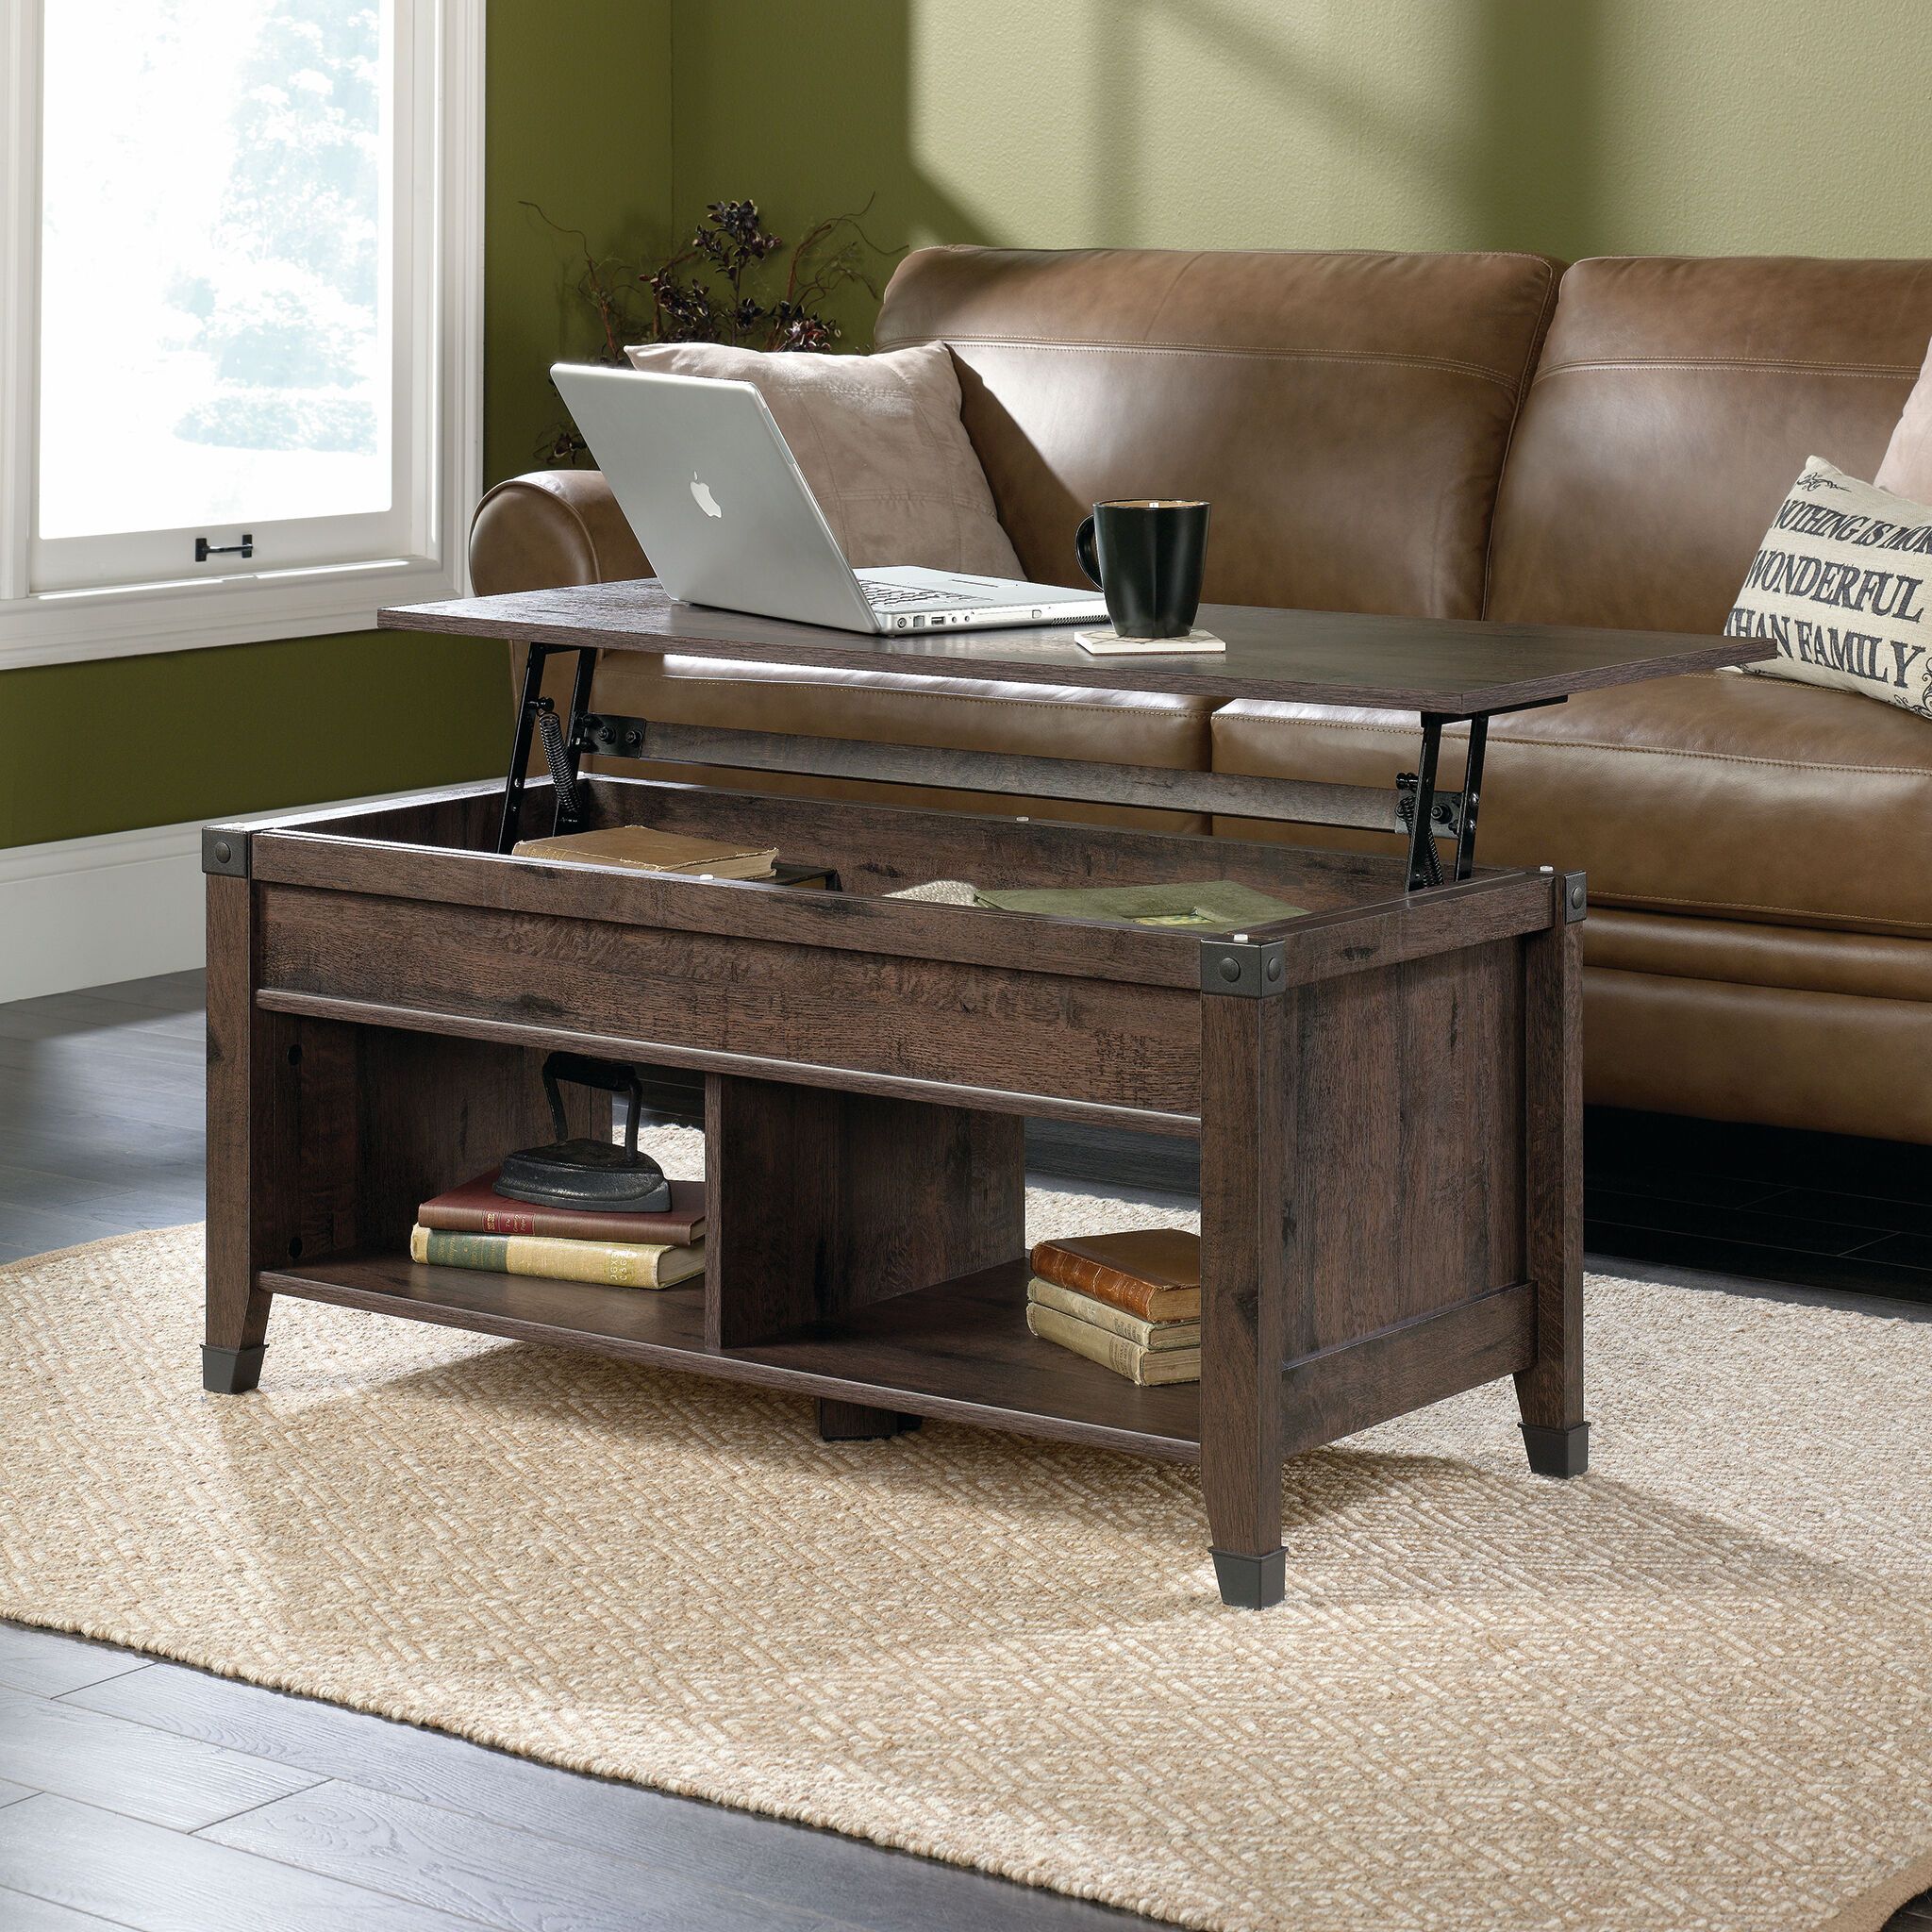 Rectangular Lift Top Contemporary Coffee Table In Coffee Oak | Mathis Regarding High Gloss Lift Top Coffee Tables (Gallery 12 of 21)